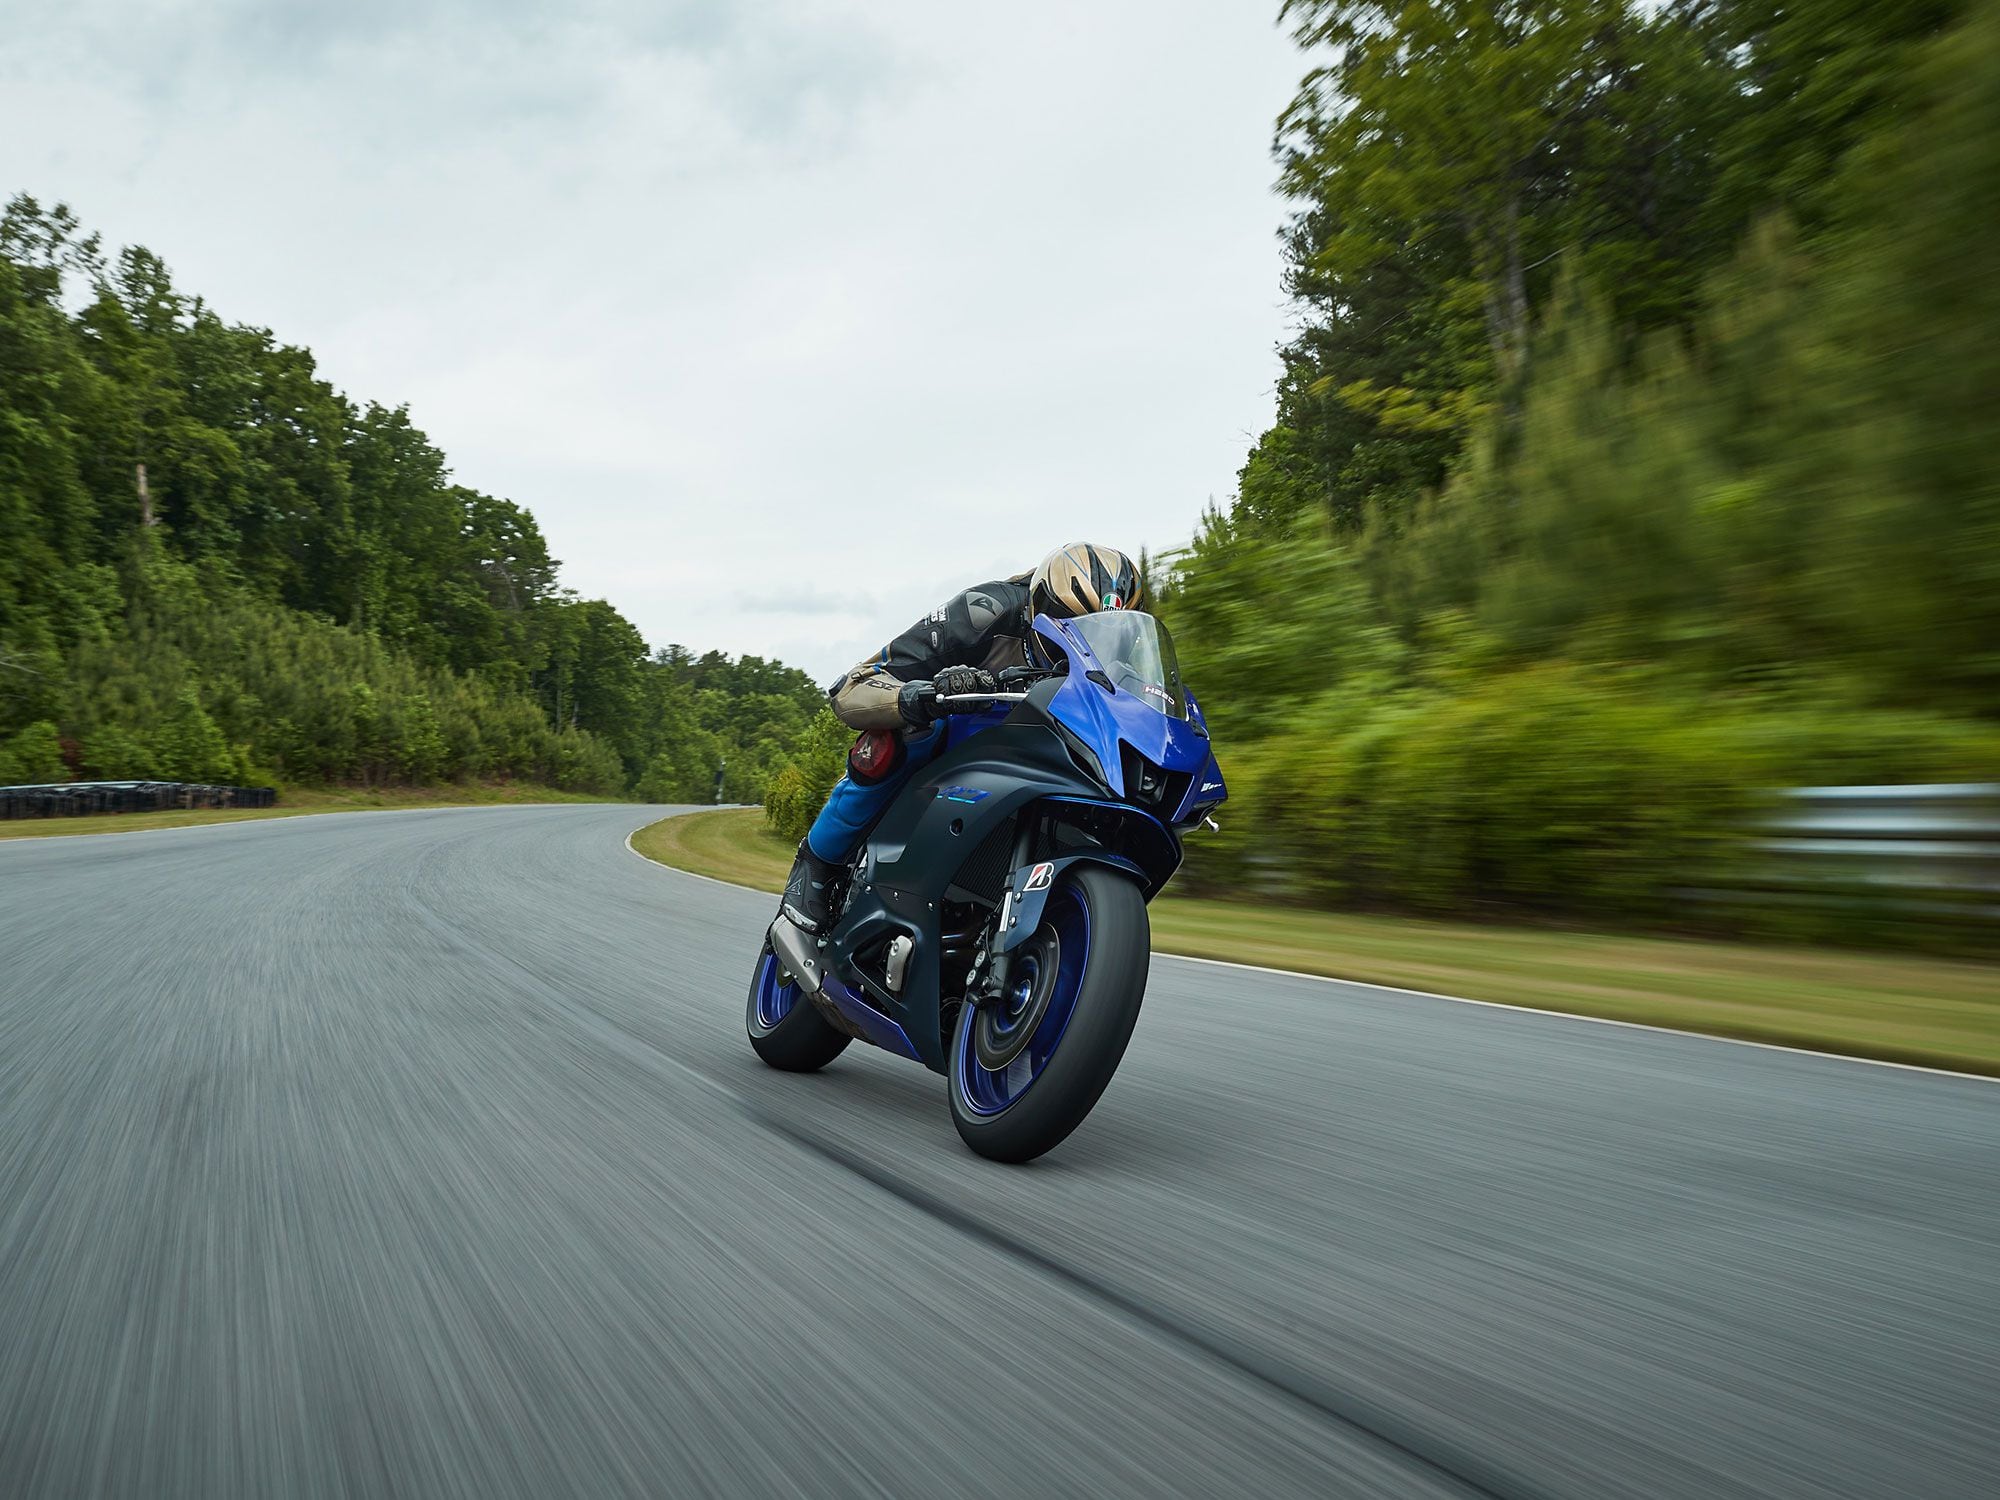 We swing a leg over Yamaha’s latest entry into its supersport line-up: the 2022 YZF-R7.